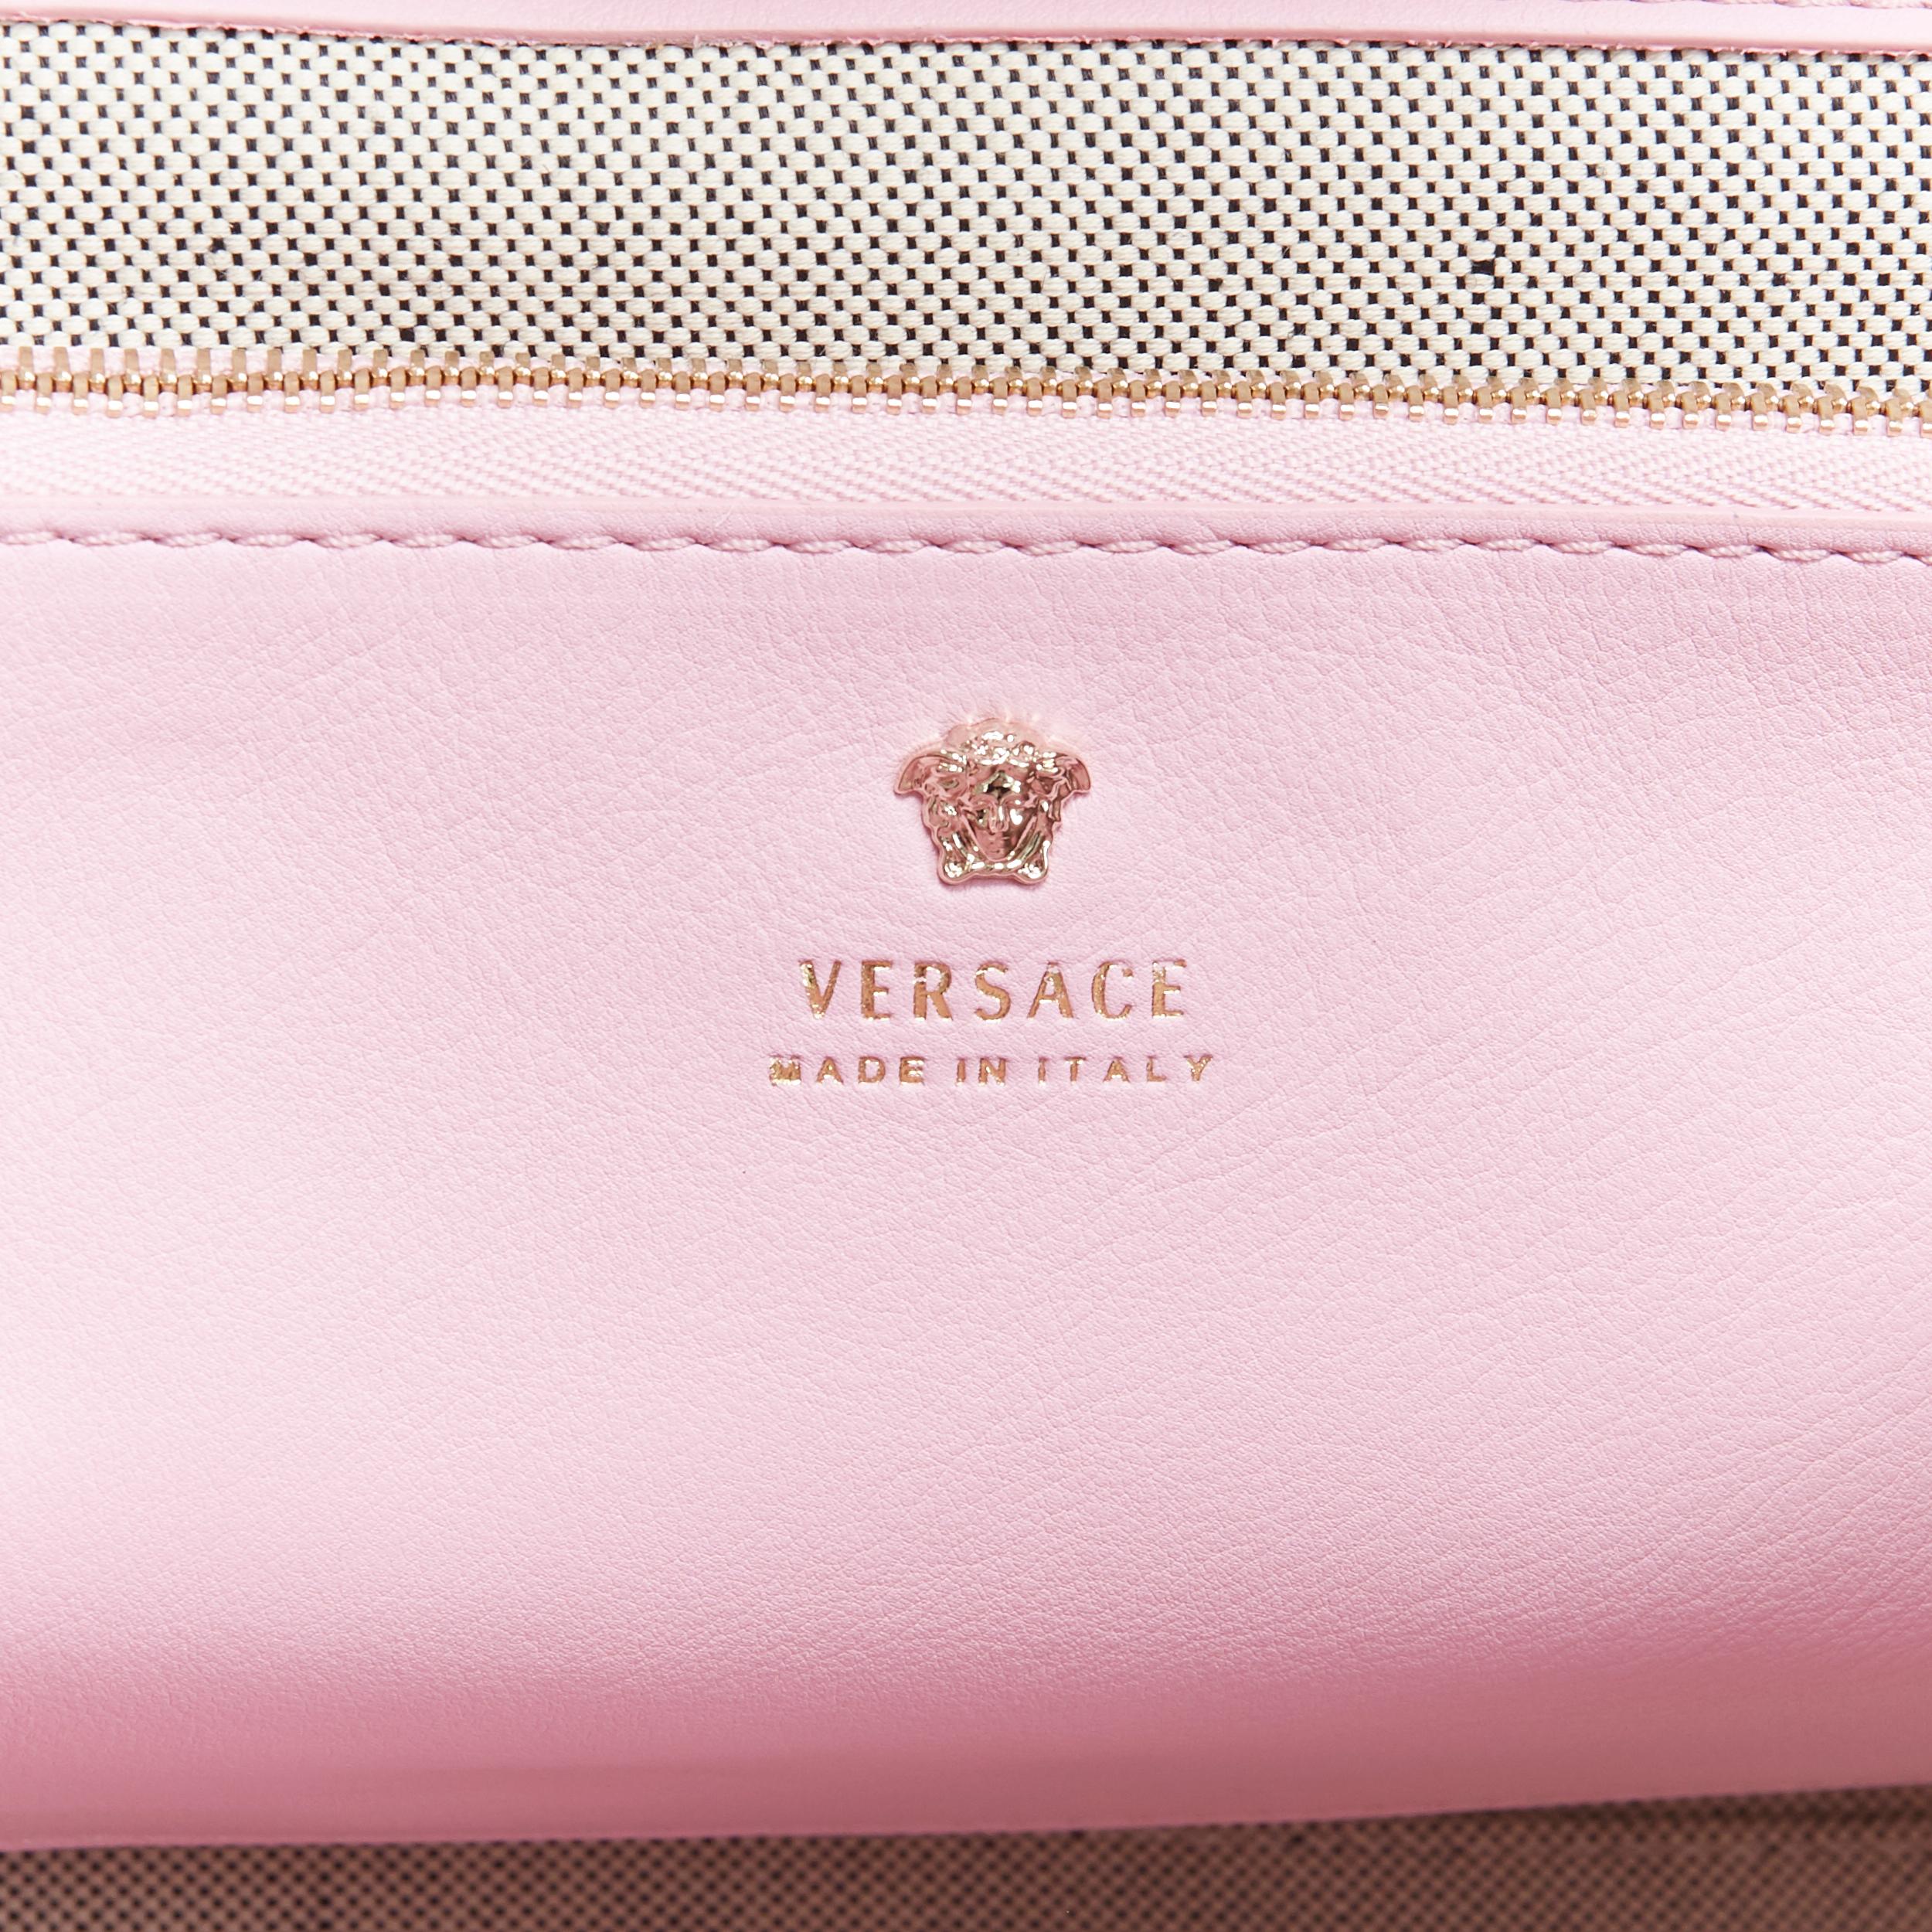 new VERSACE Palazzo Empire pink leather embroidery Medusa flap shoulder bag 3